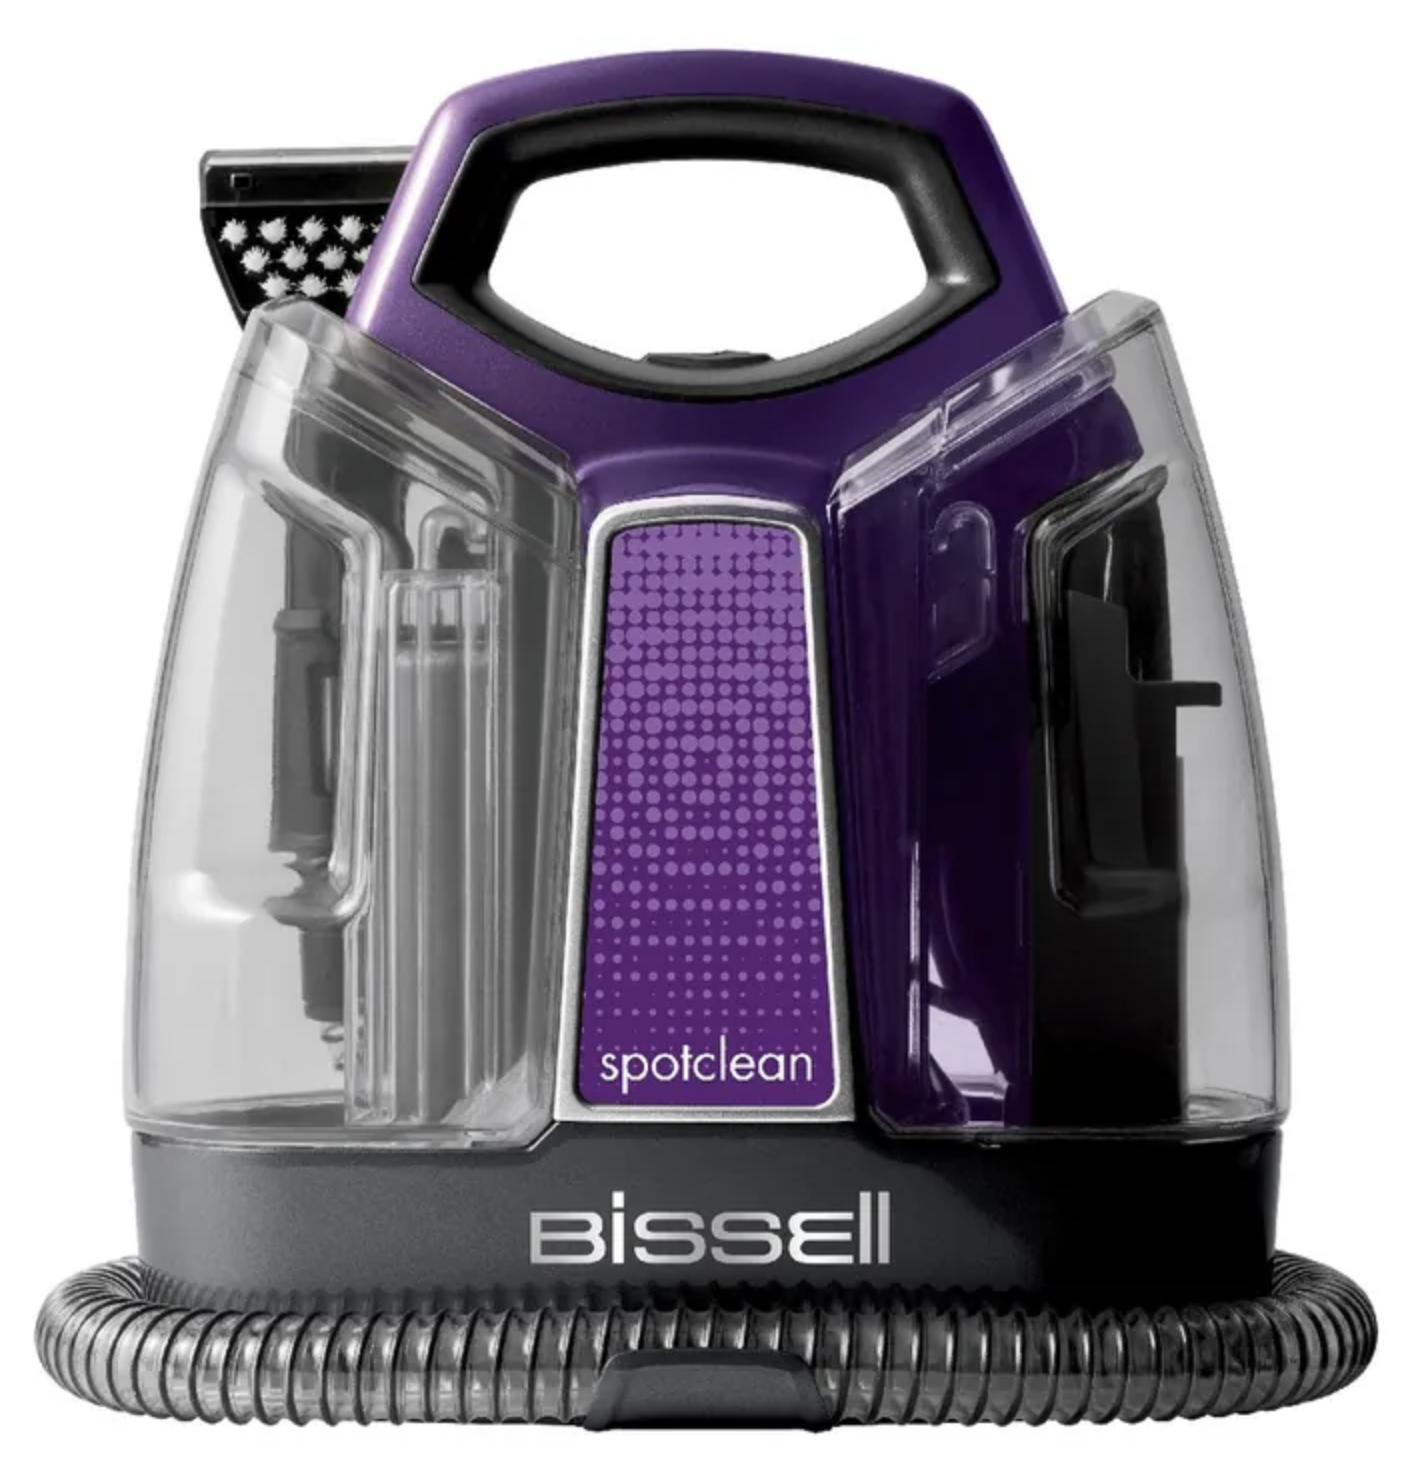 Bissell 36984 Spot Clean Carpet Cleaner